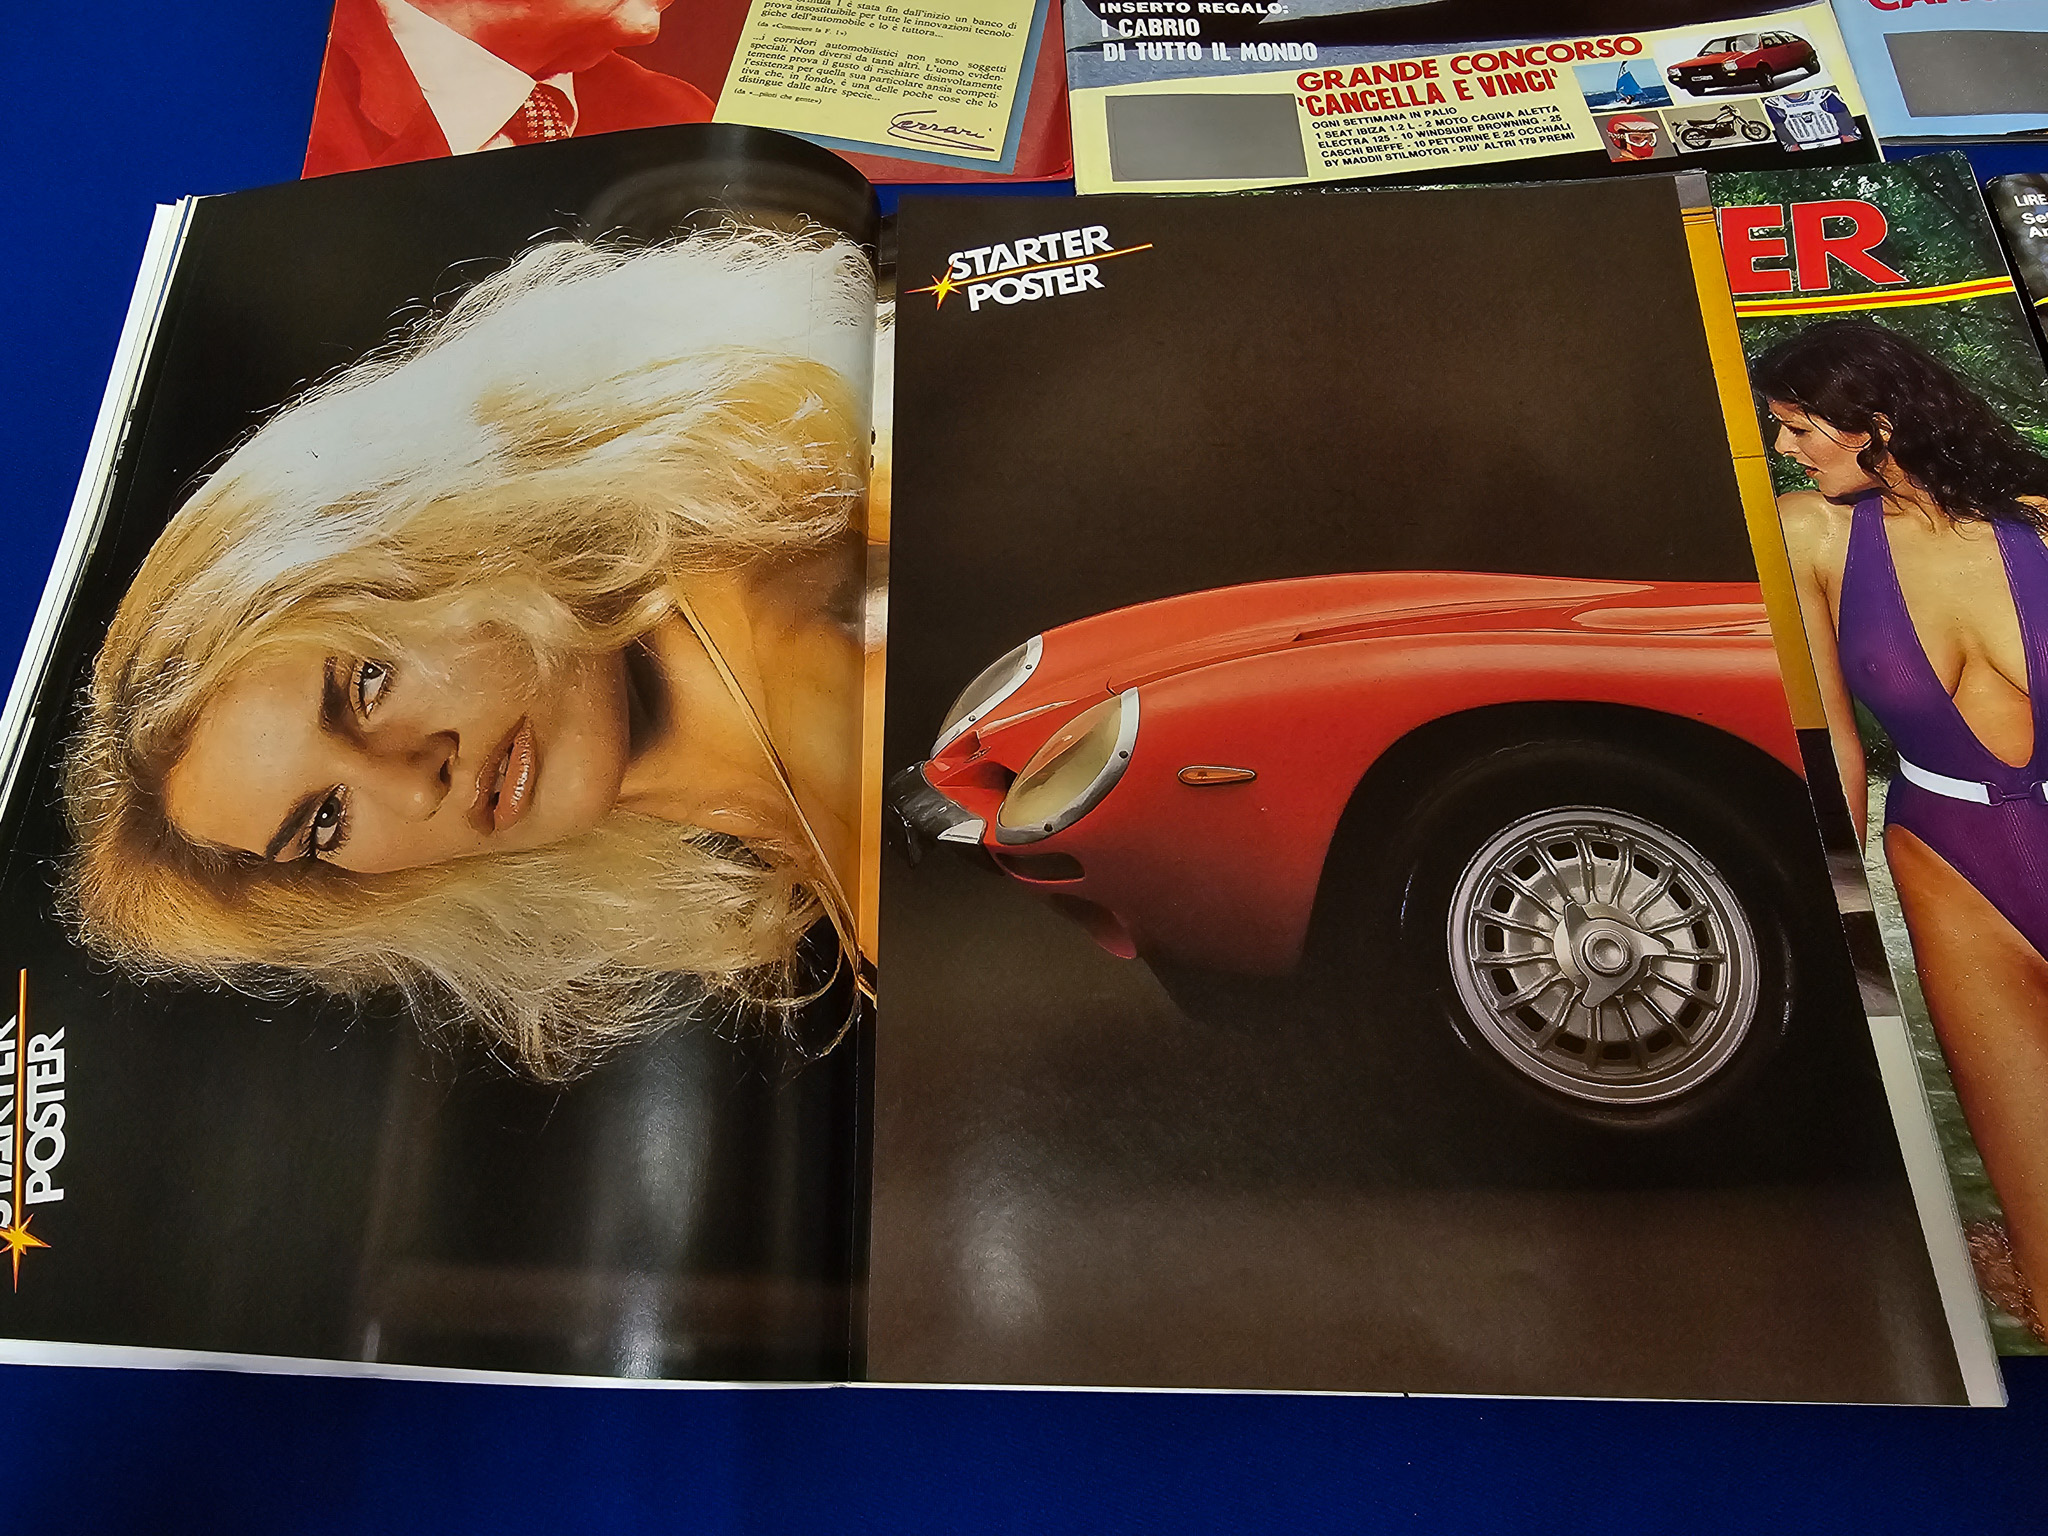 Large Collection of Starter Magazines Italian Cars and Glamour Ladies Ferrari alpha etc - Image 5 of 17